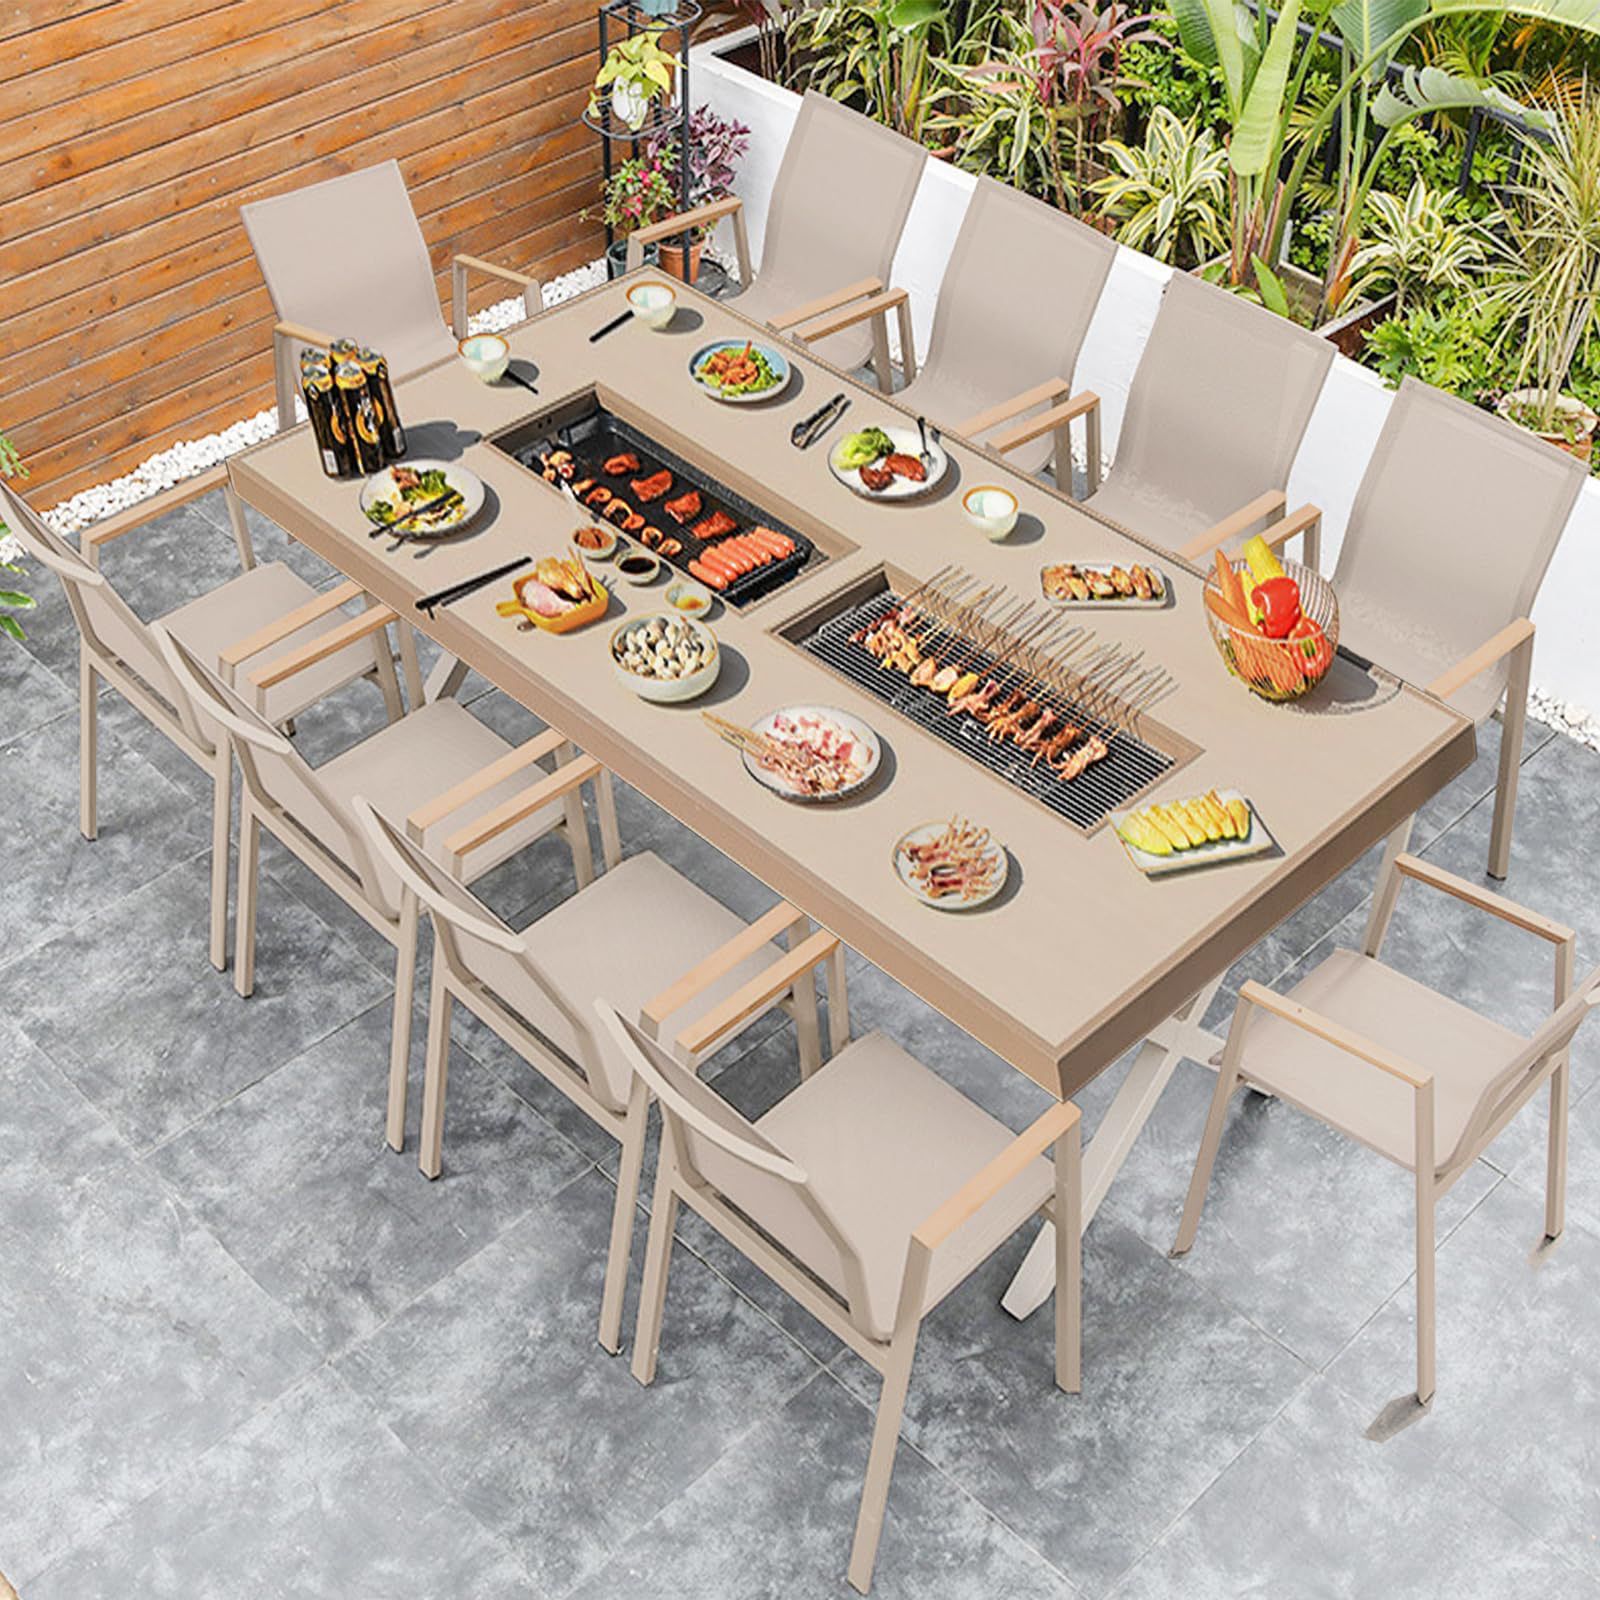 Patio BBQ Tables outdoor Dining Set L200 CM double Oven (electric and Charcoal)